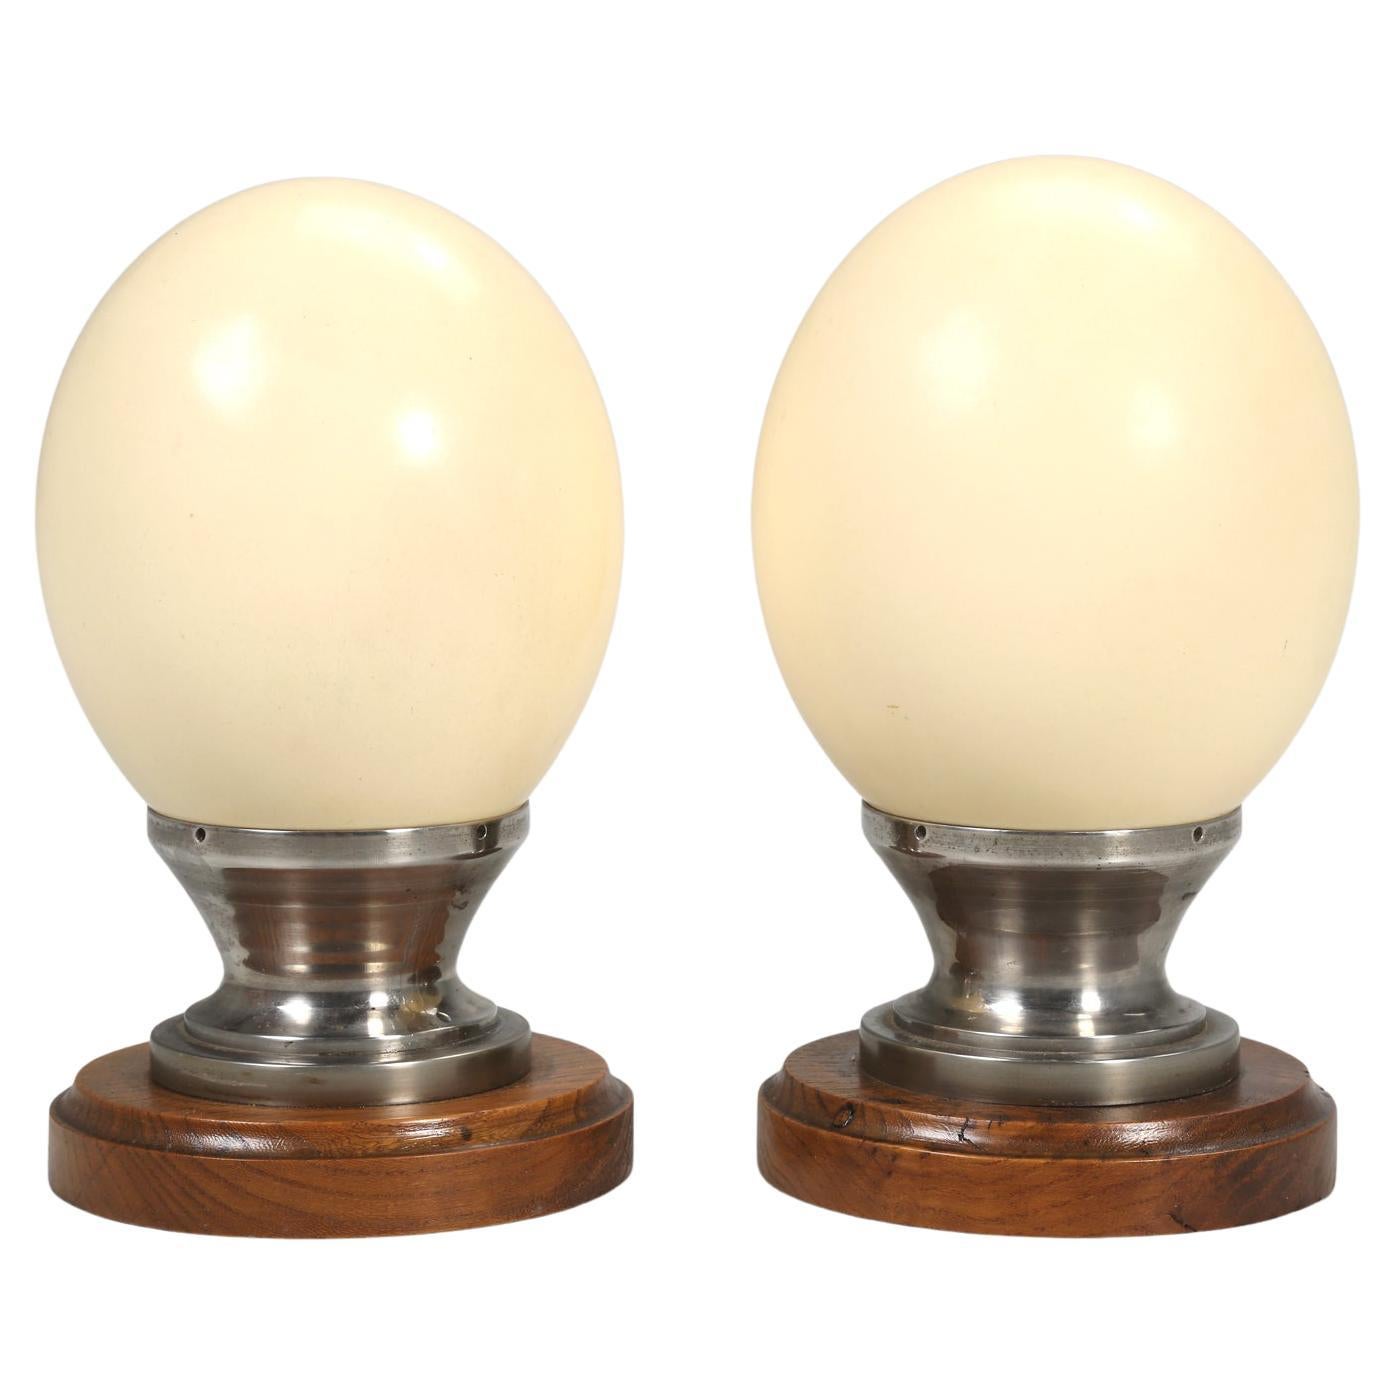 Ostrich Egg & Eco Wood Stand Christmas Gift 